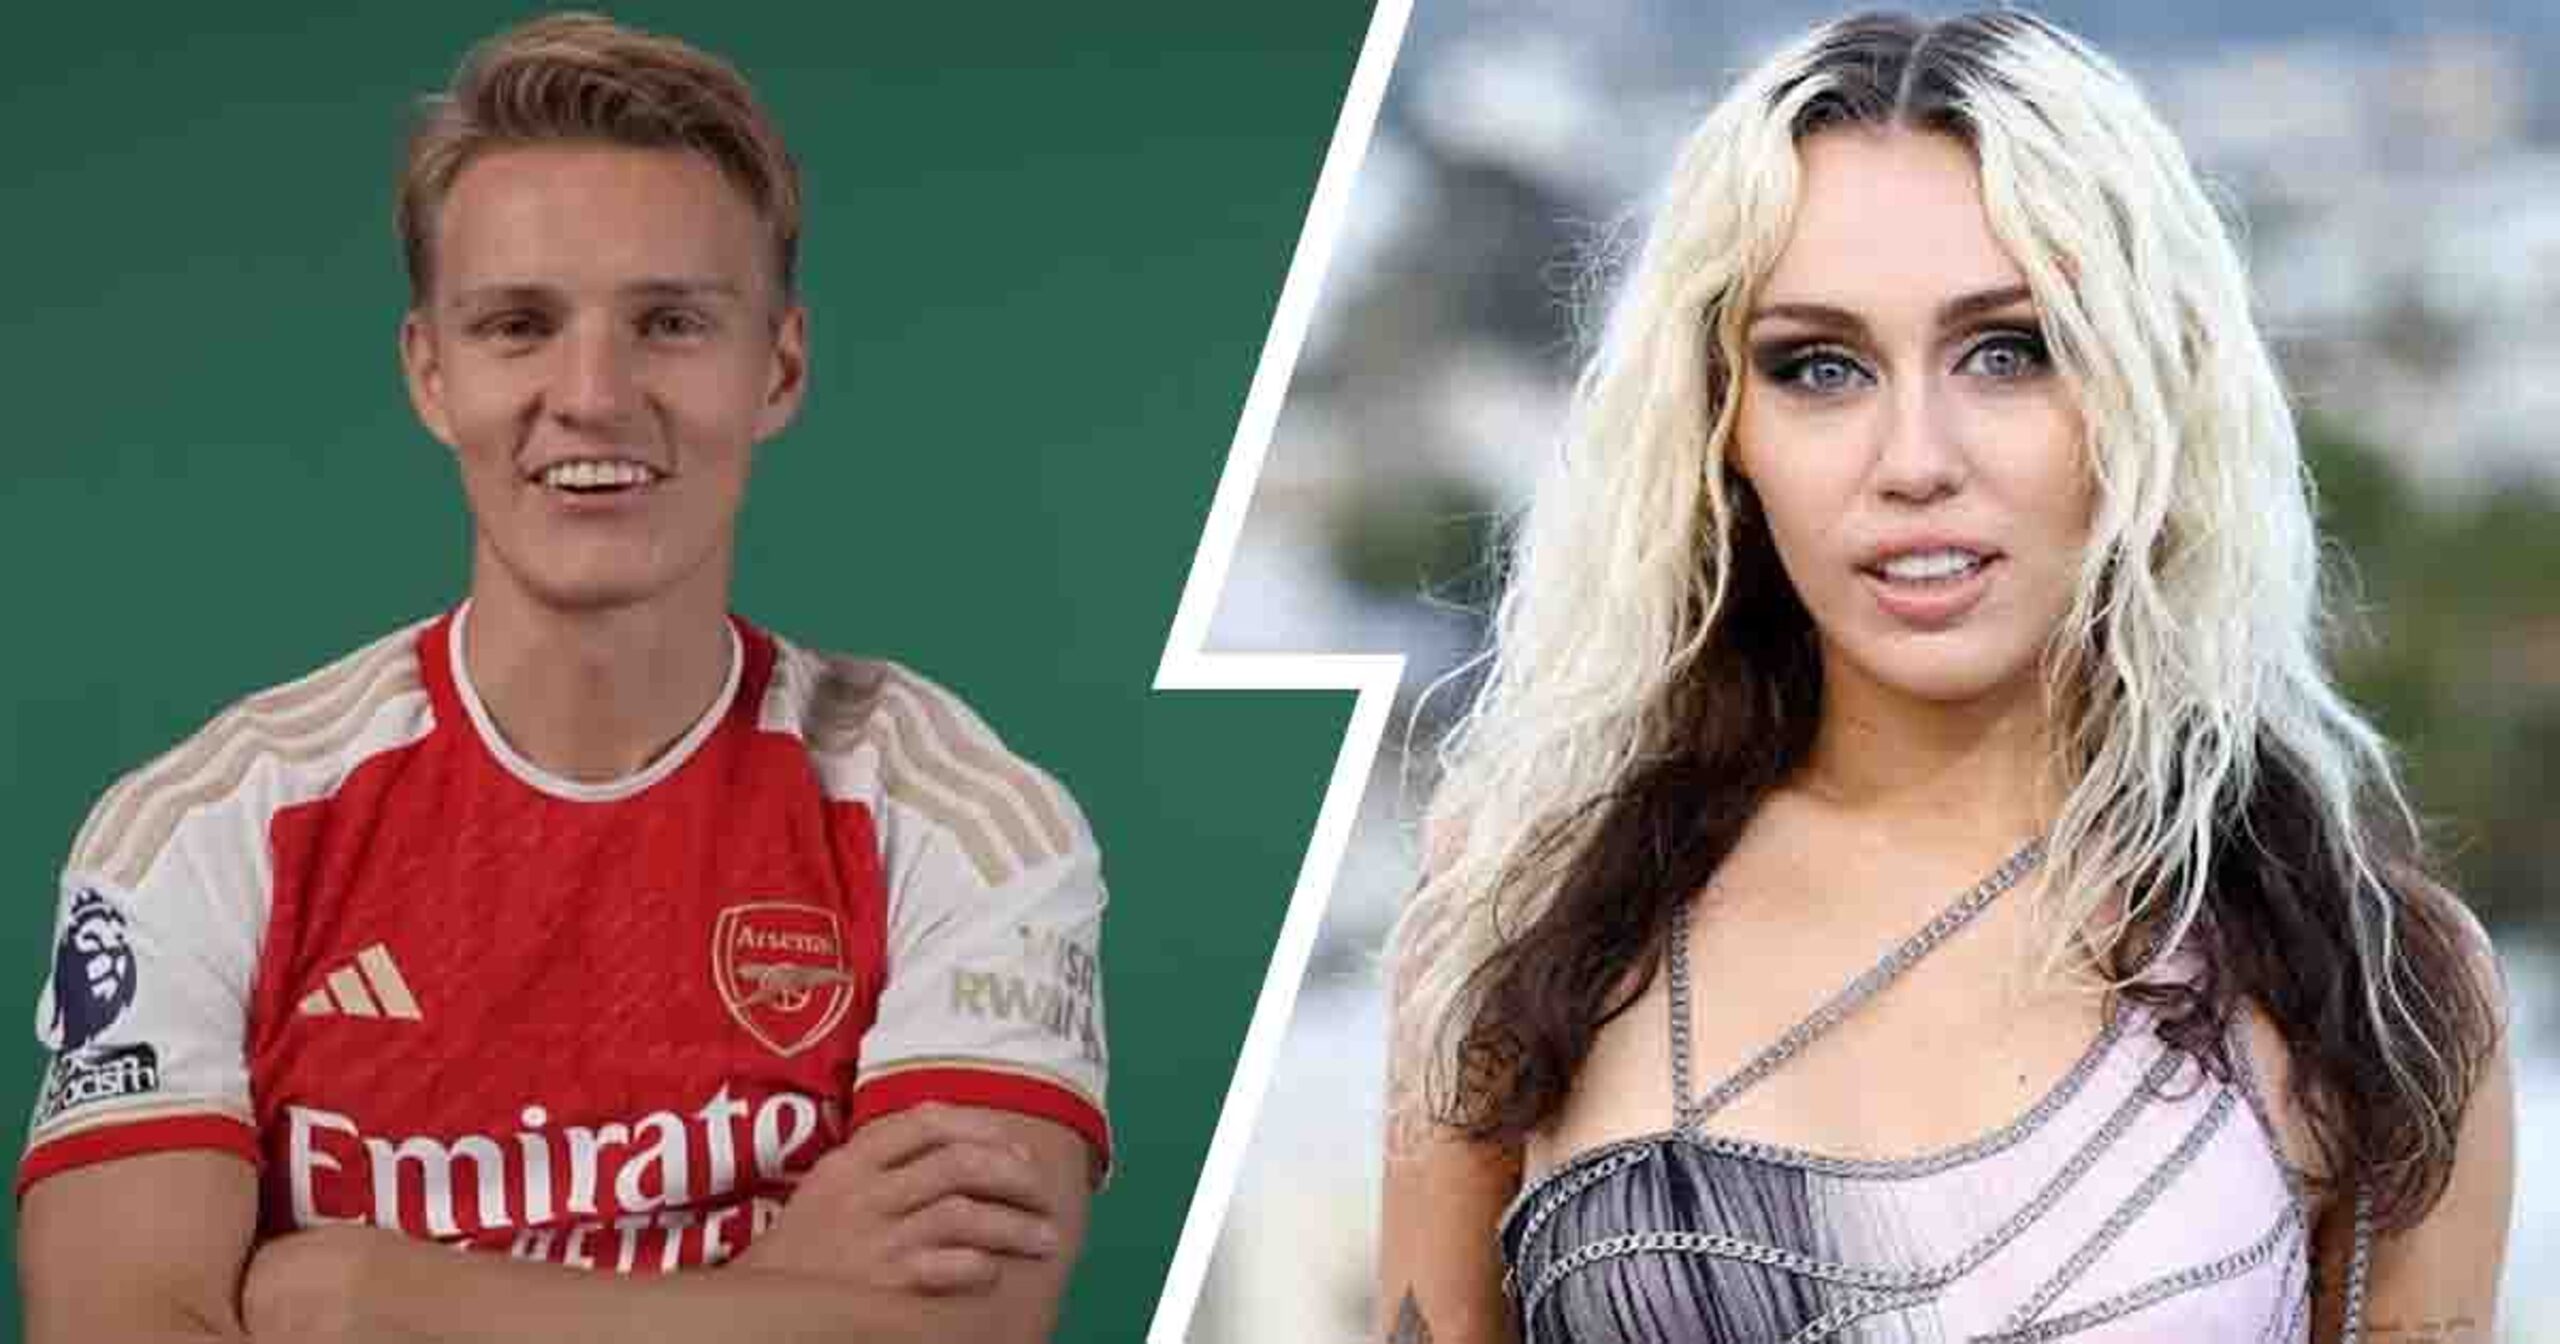 Why Is Martin Odegaard Called Miley Cyrus? Slander Name Explained